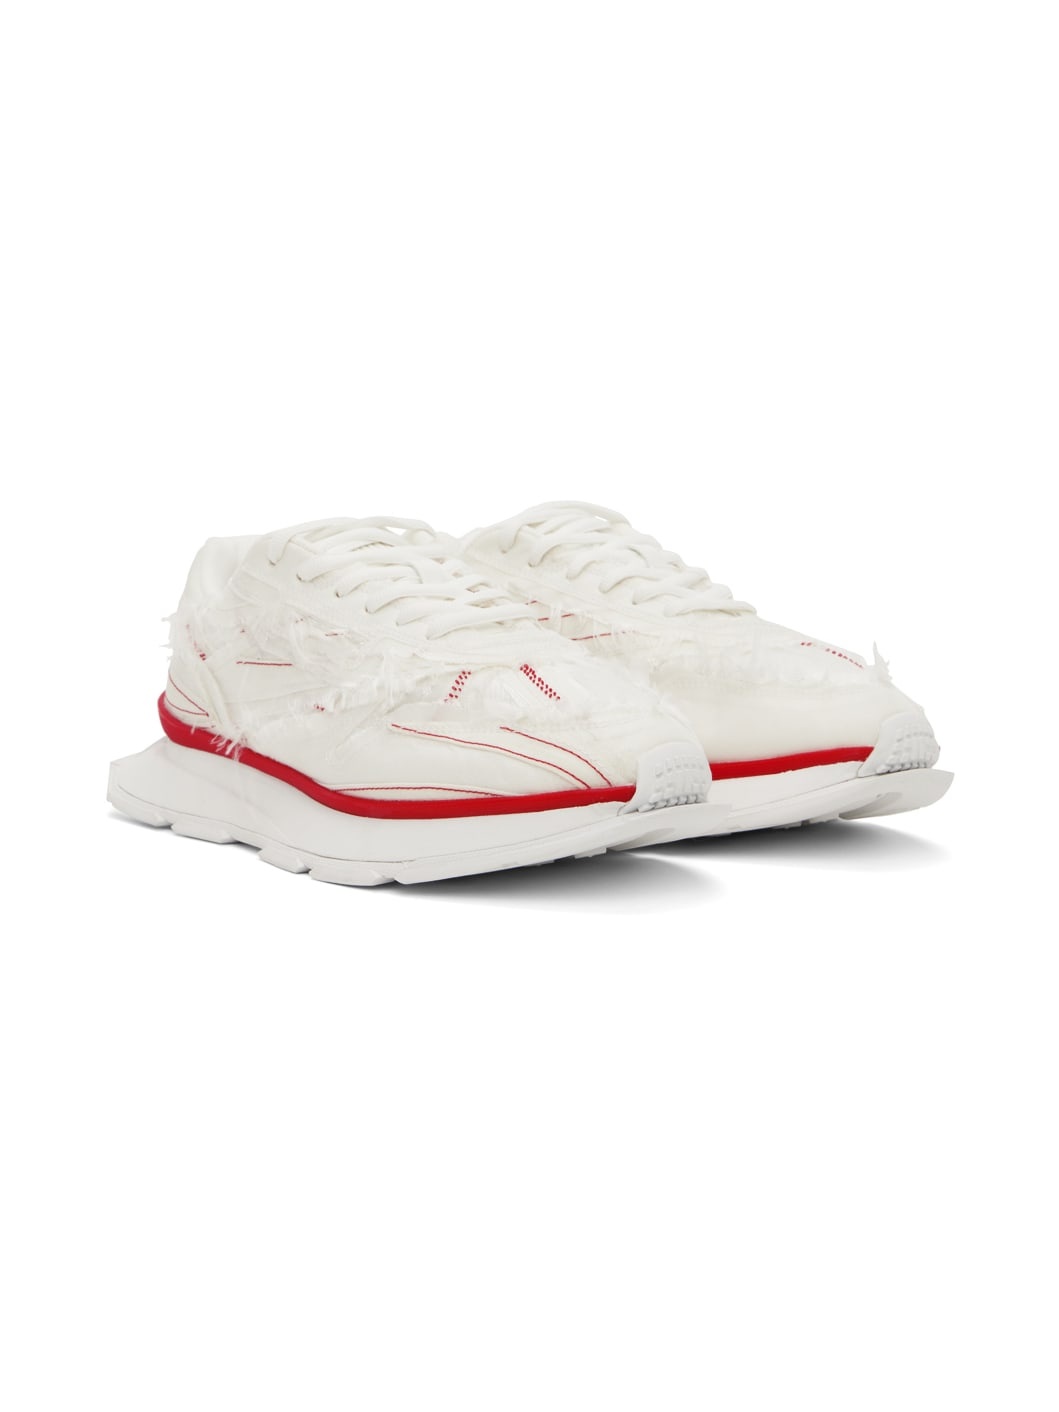 White Reebok Edition Classic Leather LTD Sneakers - 4